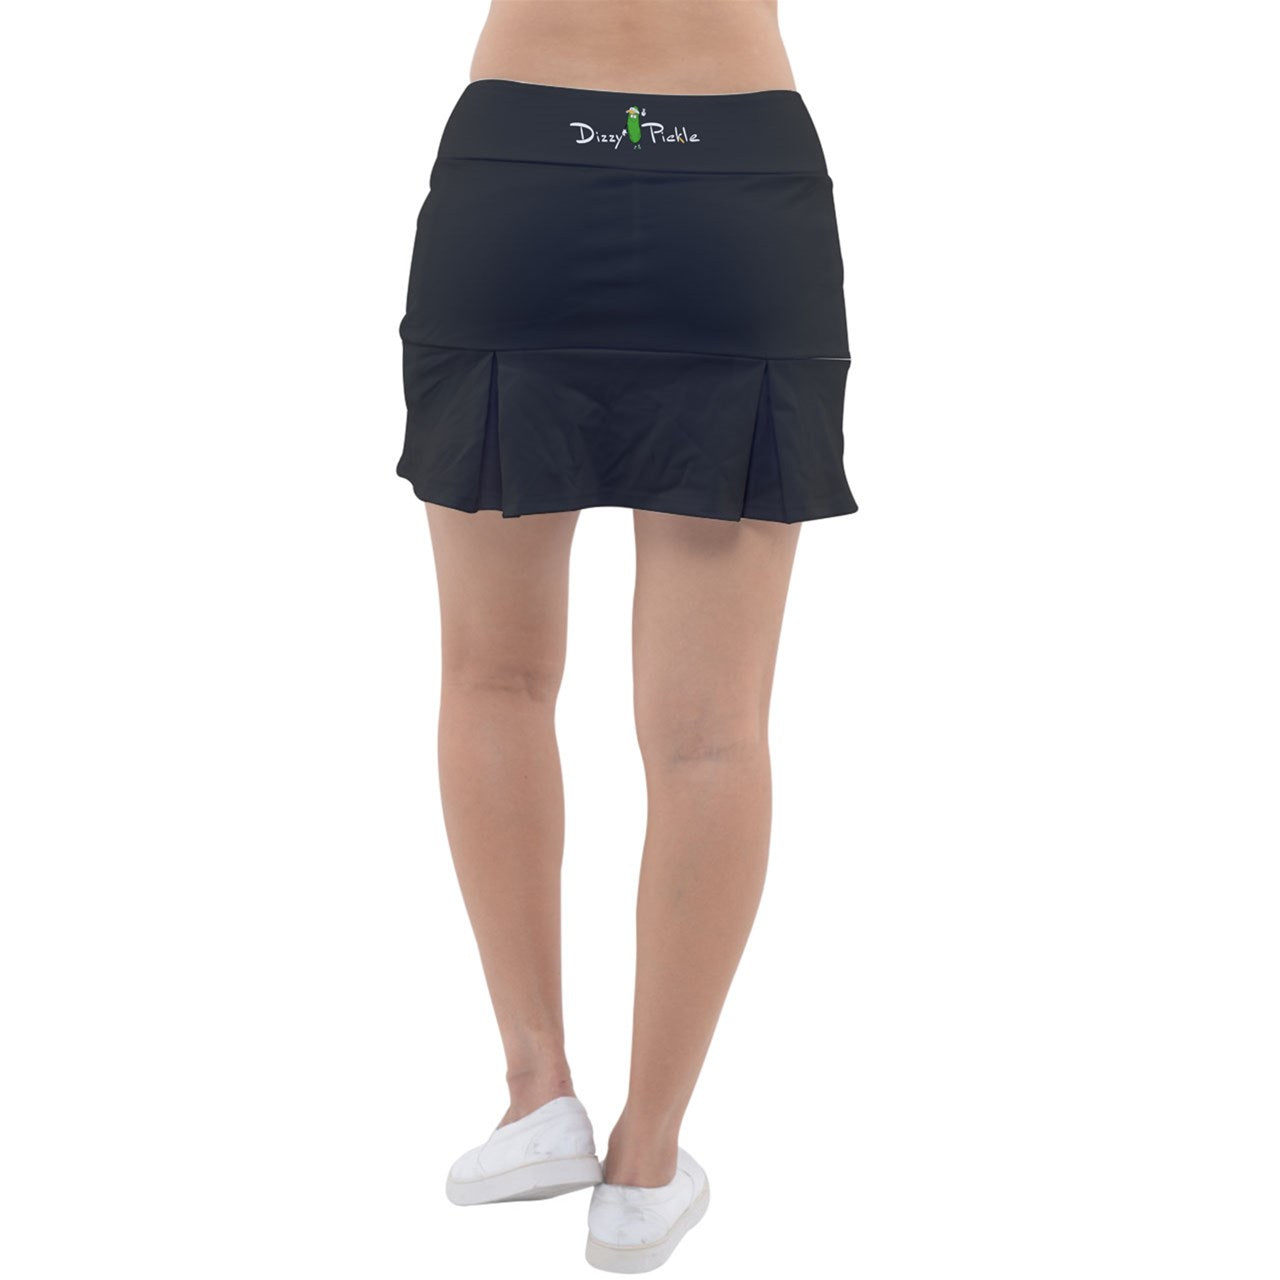 Dizzy Pickle Heidi BKW Solid Classic Women's Pickleball Pleated Skorts with Inner Shorts & Pockets Black